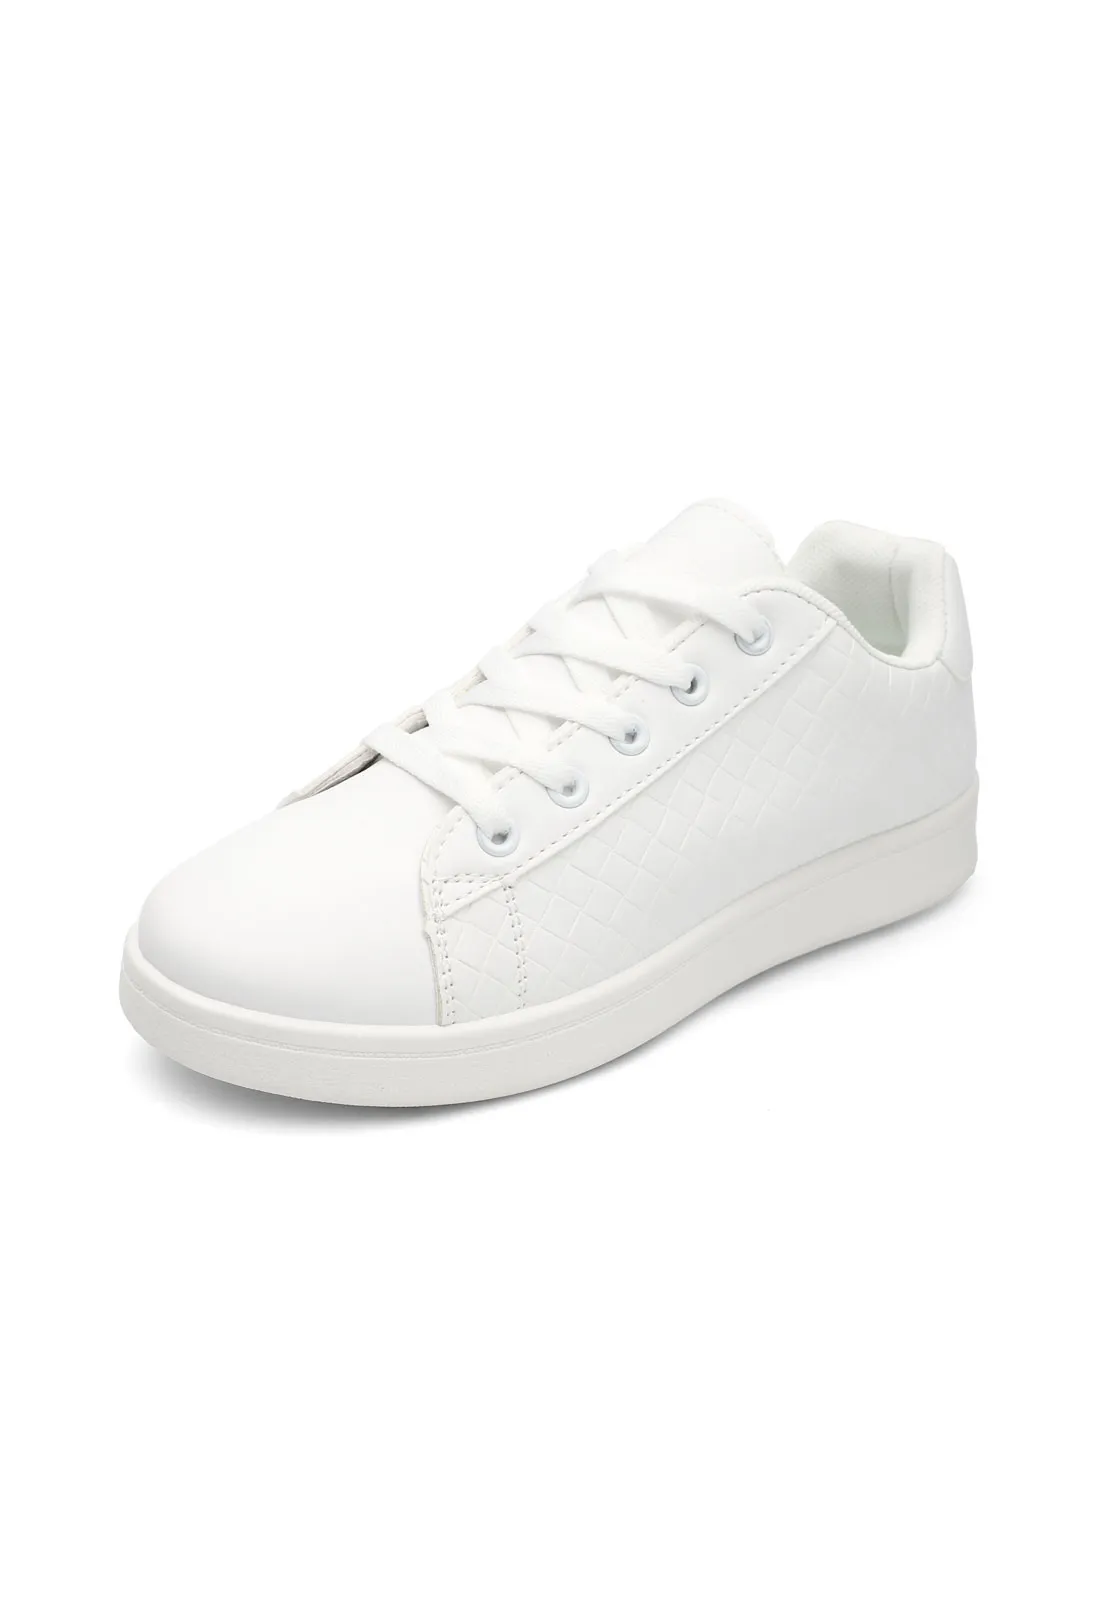 Price Shoes Tenis Casual Mujer 702Pu18W03Blanco